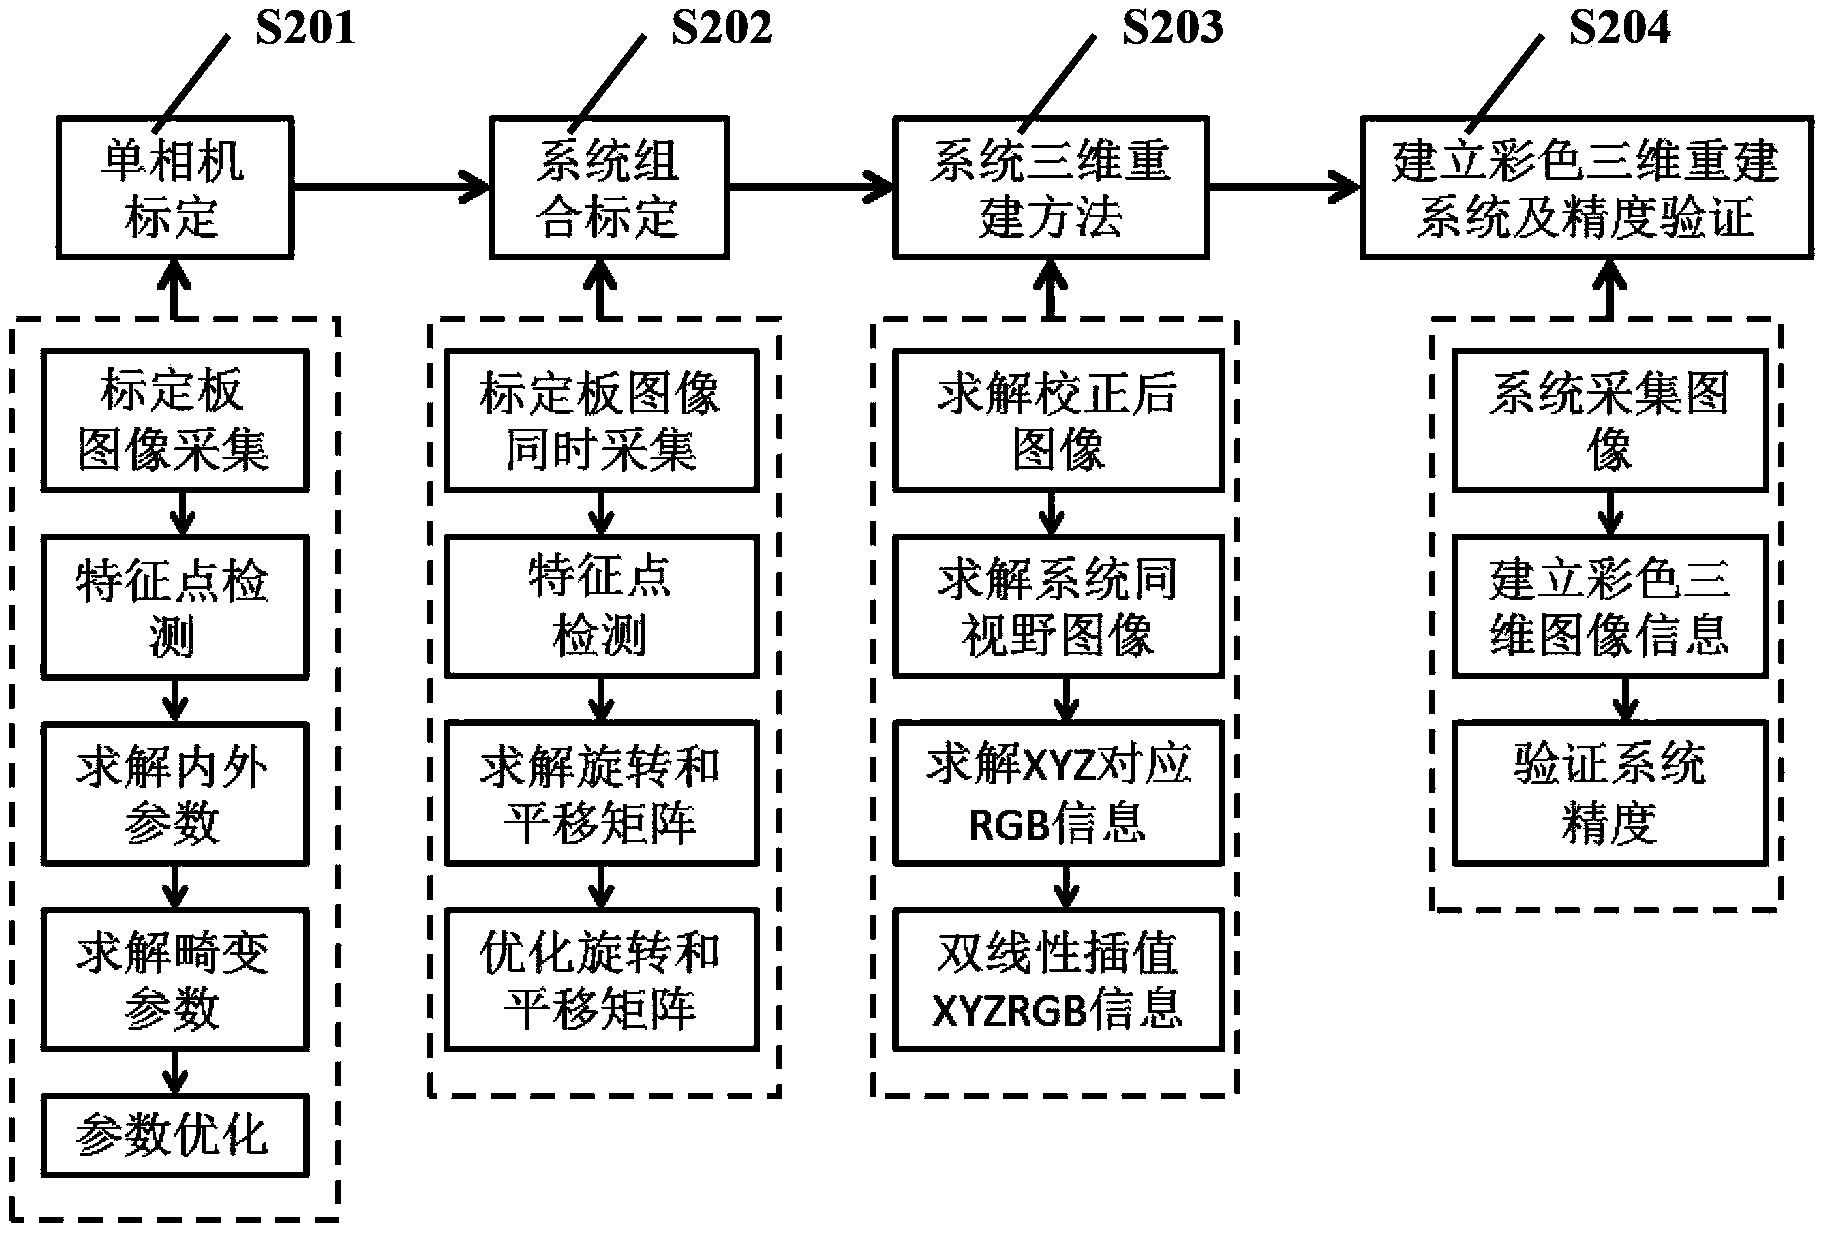 Three-dimensional color reconstruction system and method based on PMD (photonic mixer device) cameras and photographing head